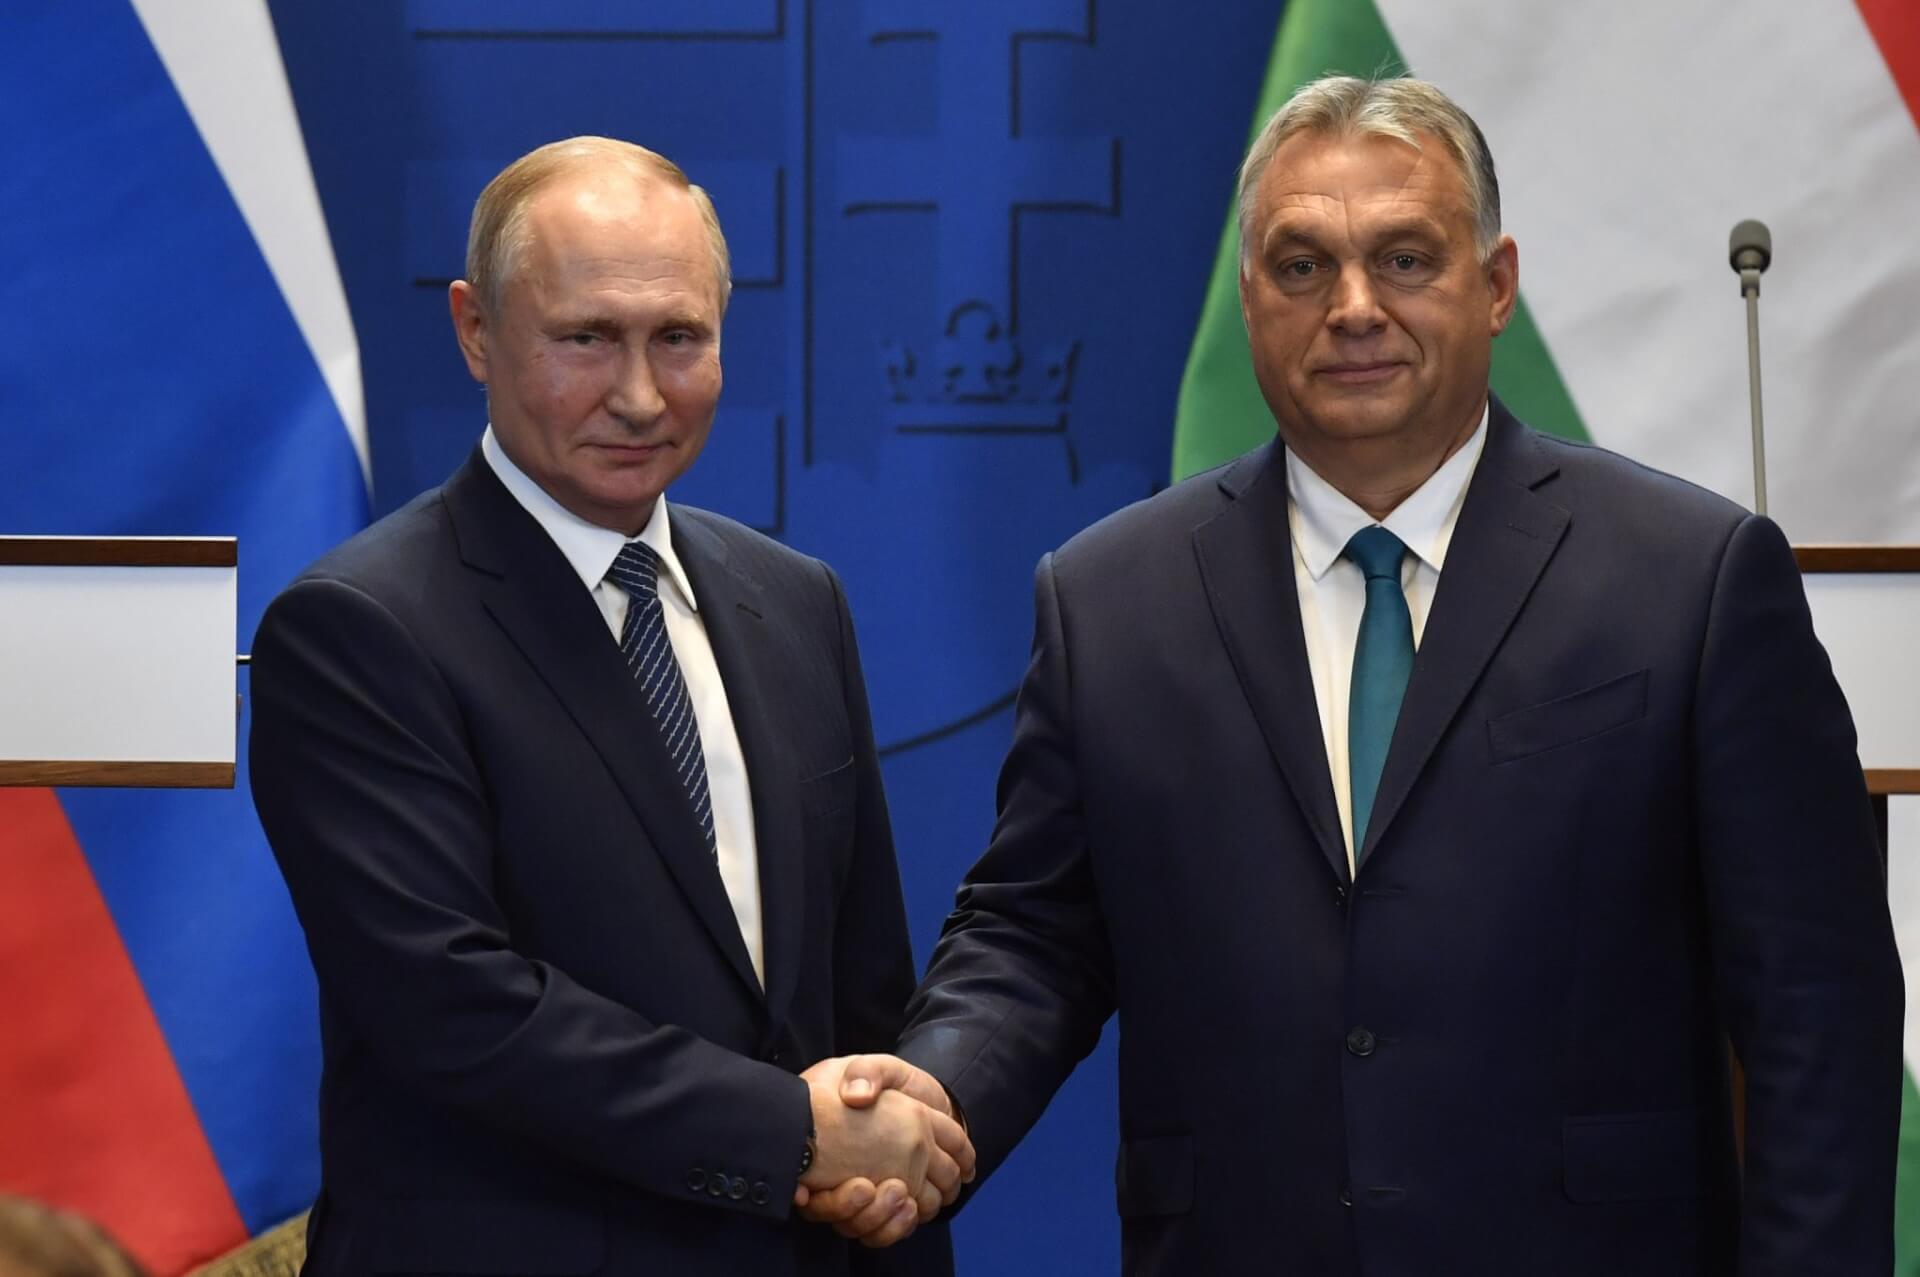 Hungary PM Orbán Supports Putin, Says Sanctions Hurt Budapest More Than Moscow